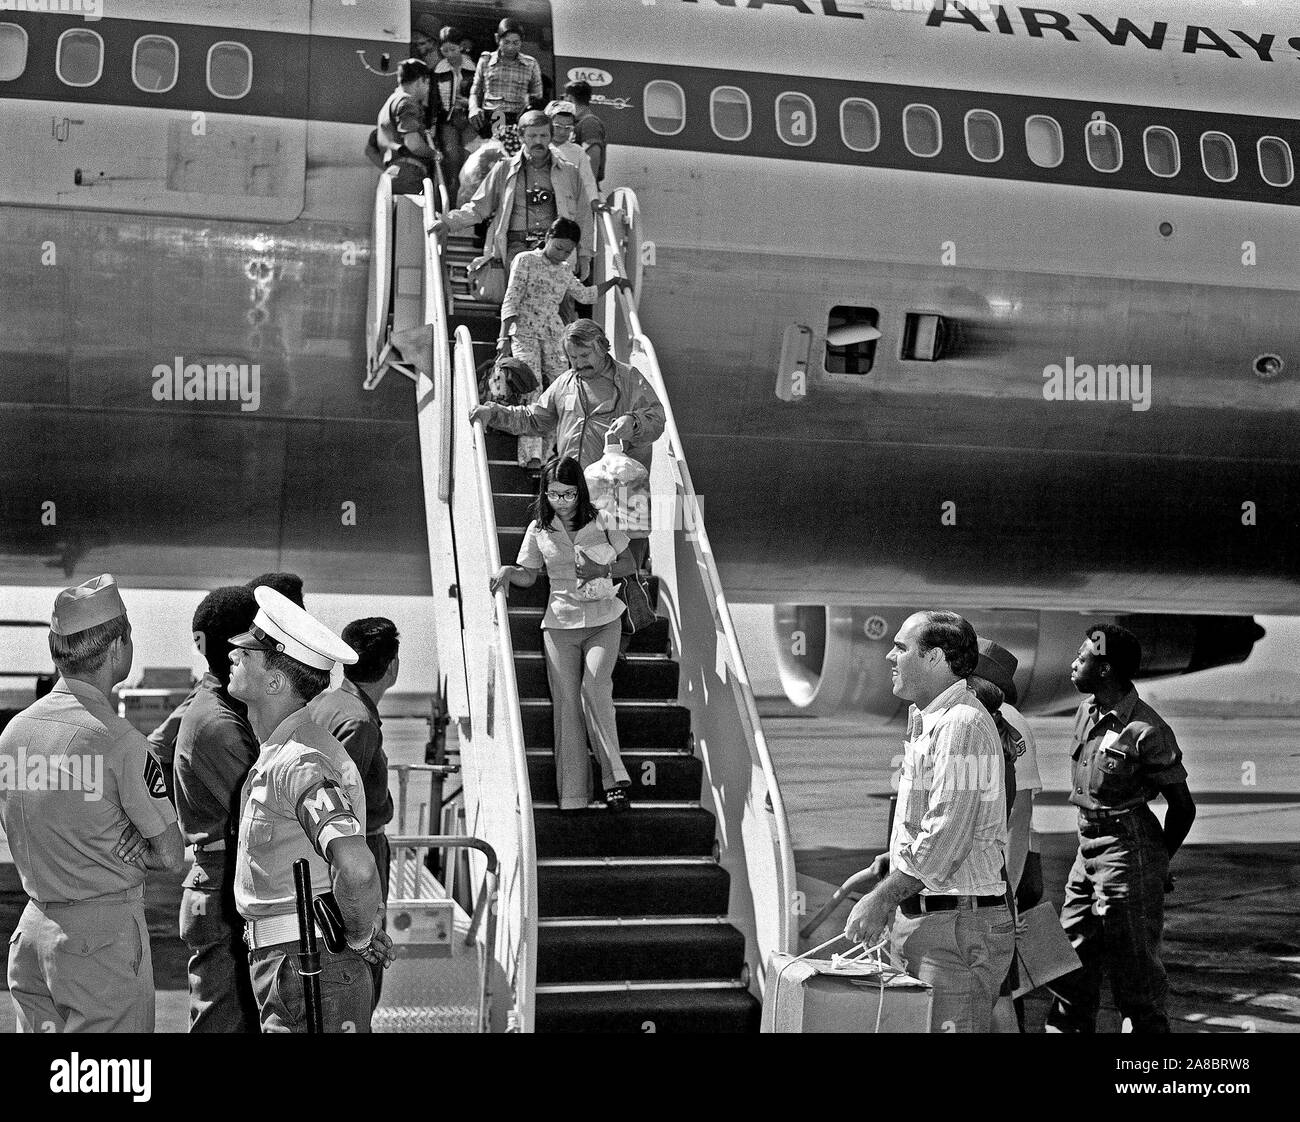 1975 - Vietnamese refugees arrive at the air station after being ...